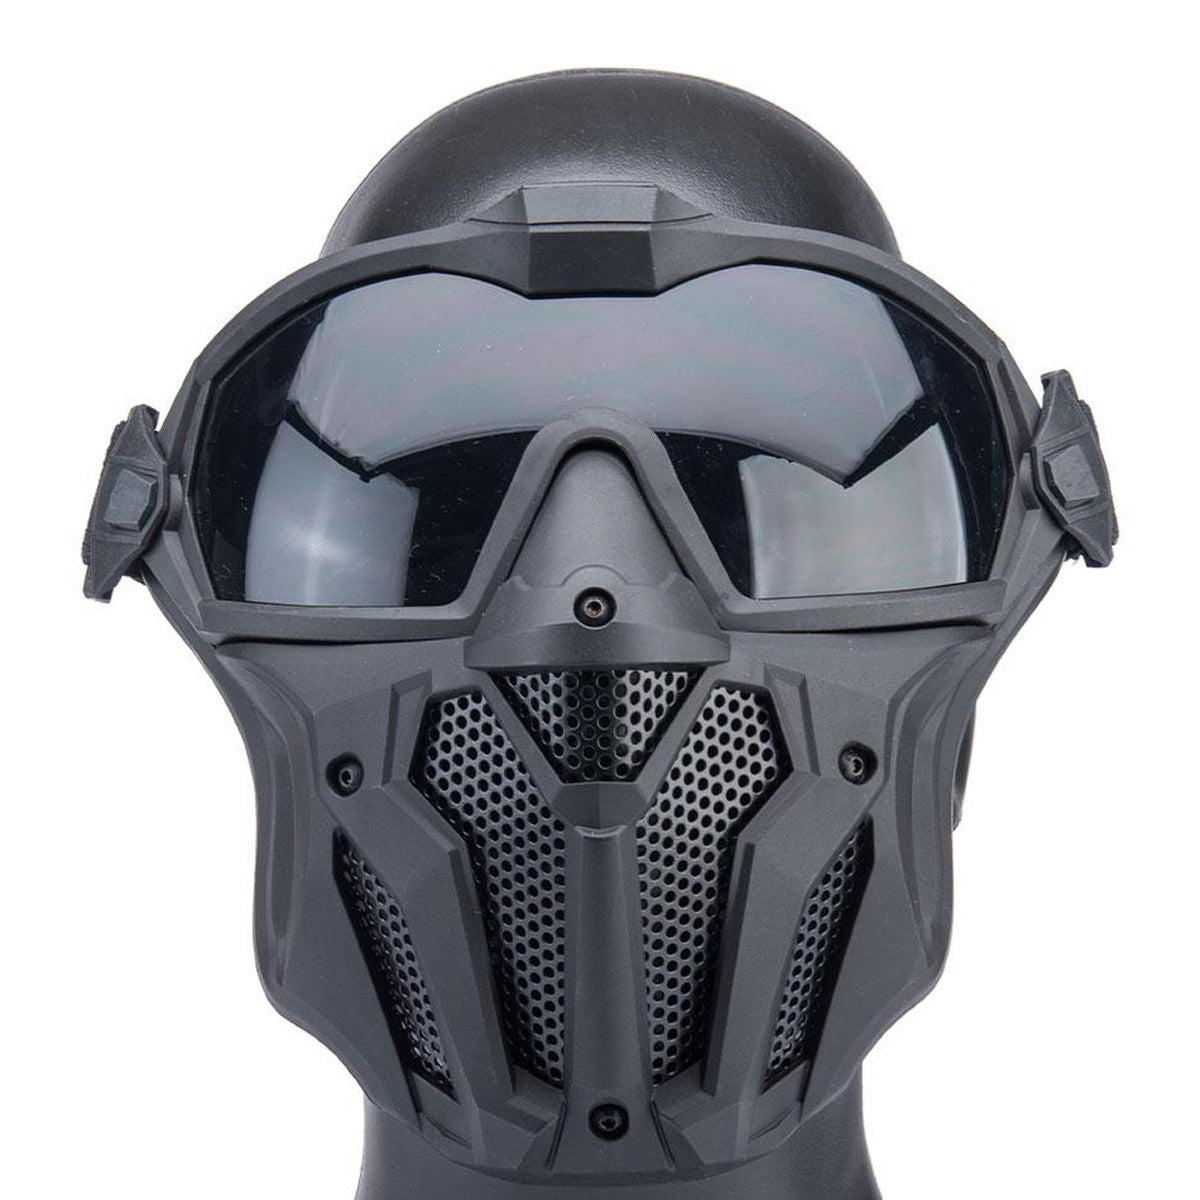 WOSPORT TACTICAL AIRSOFT FULL FACE MASK ANTI-FOG GOGGLES